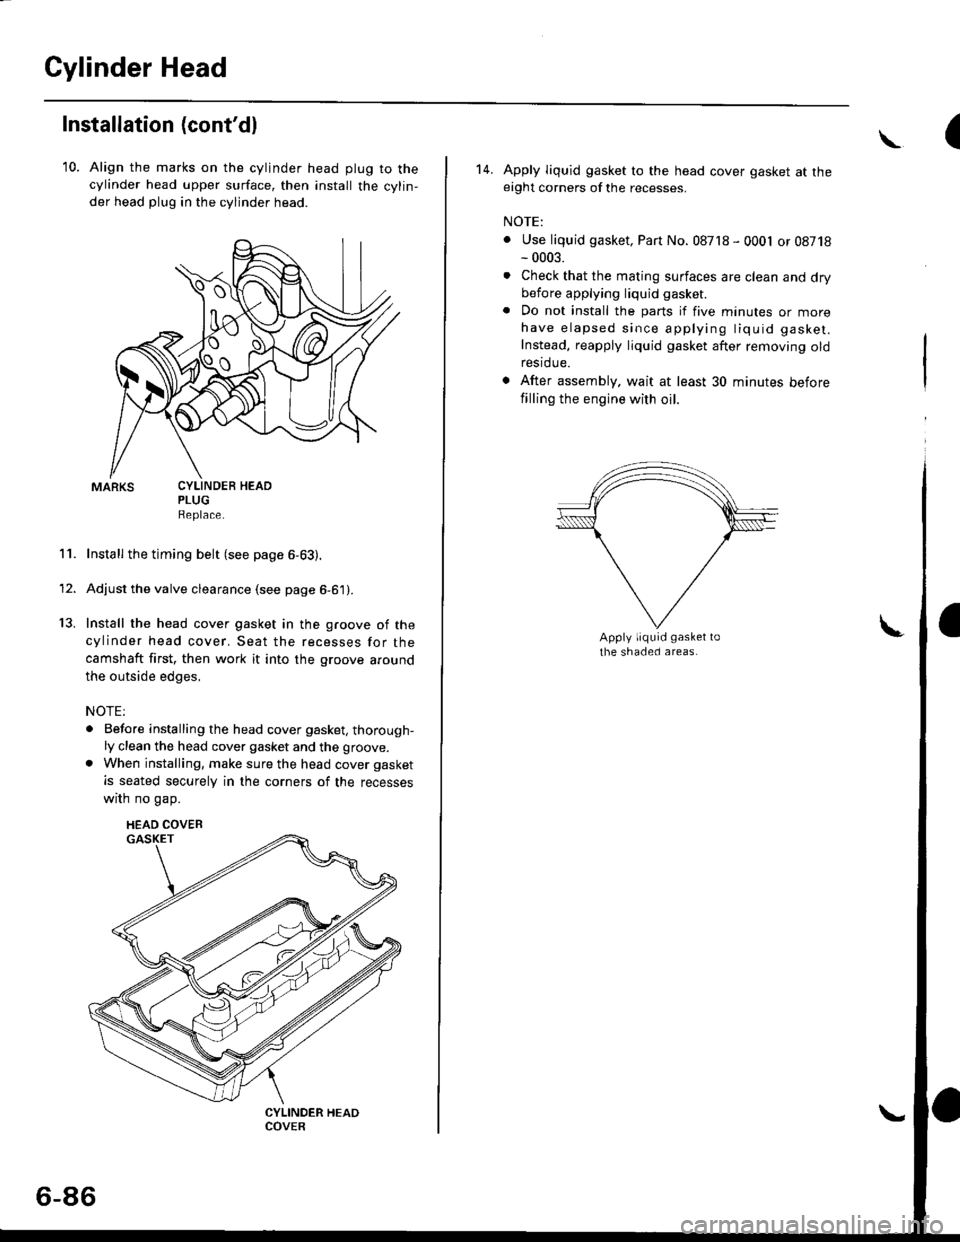 HONDA CIVIC 1996 6.G Service Manual Cylinder Head
Installation (contdl
10. Align the marks on the cylinder head plug to thecylinder head upper surface, then install the cylin,
der head plug in the cylinder head.
PLUGReplace.
Install th